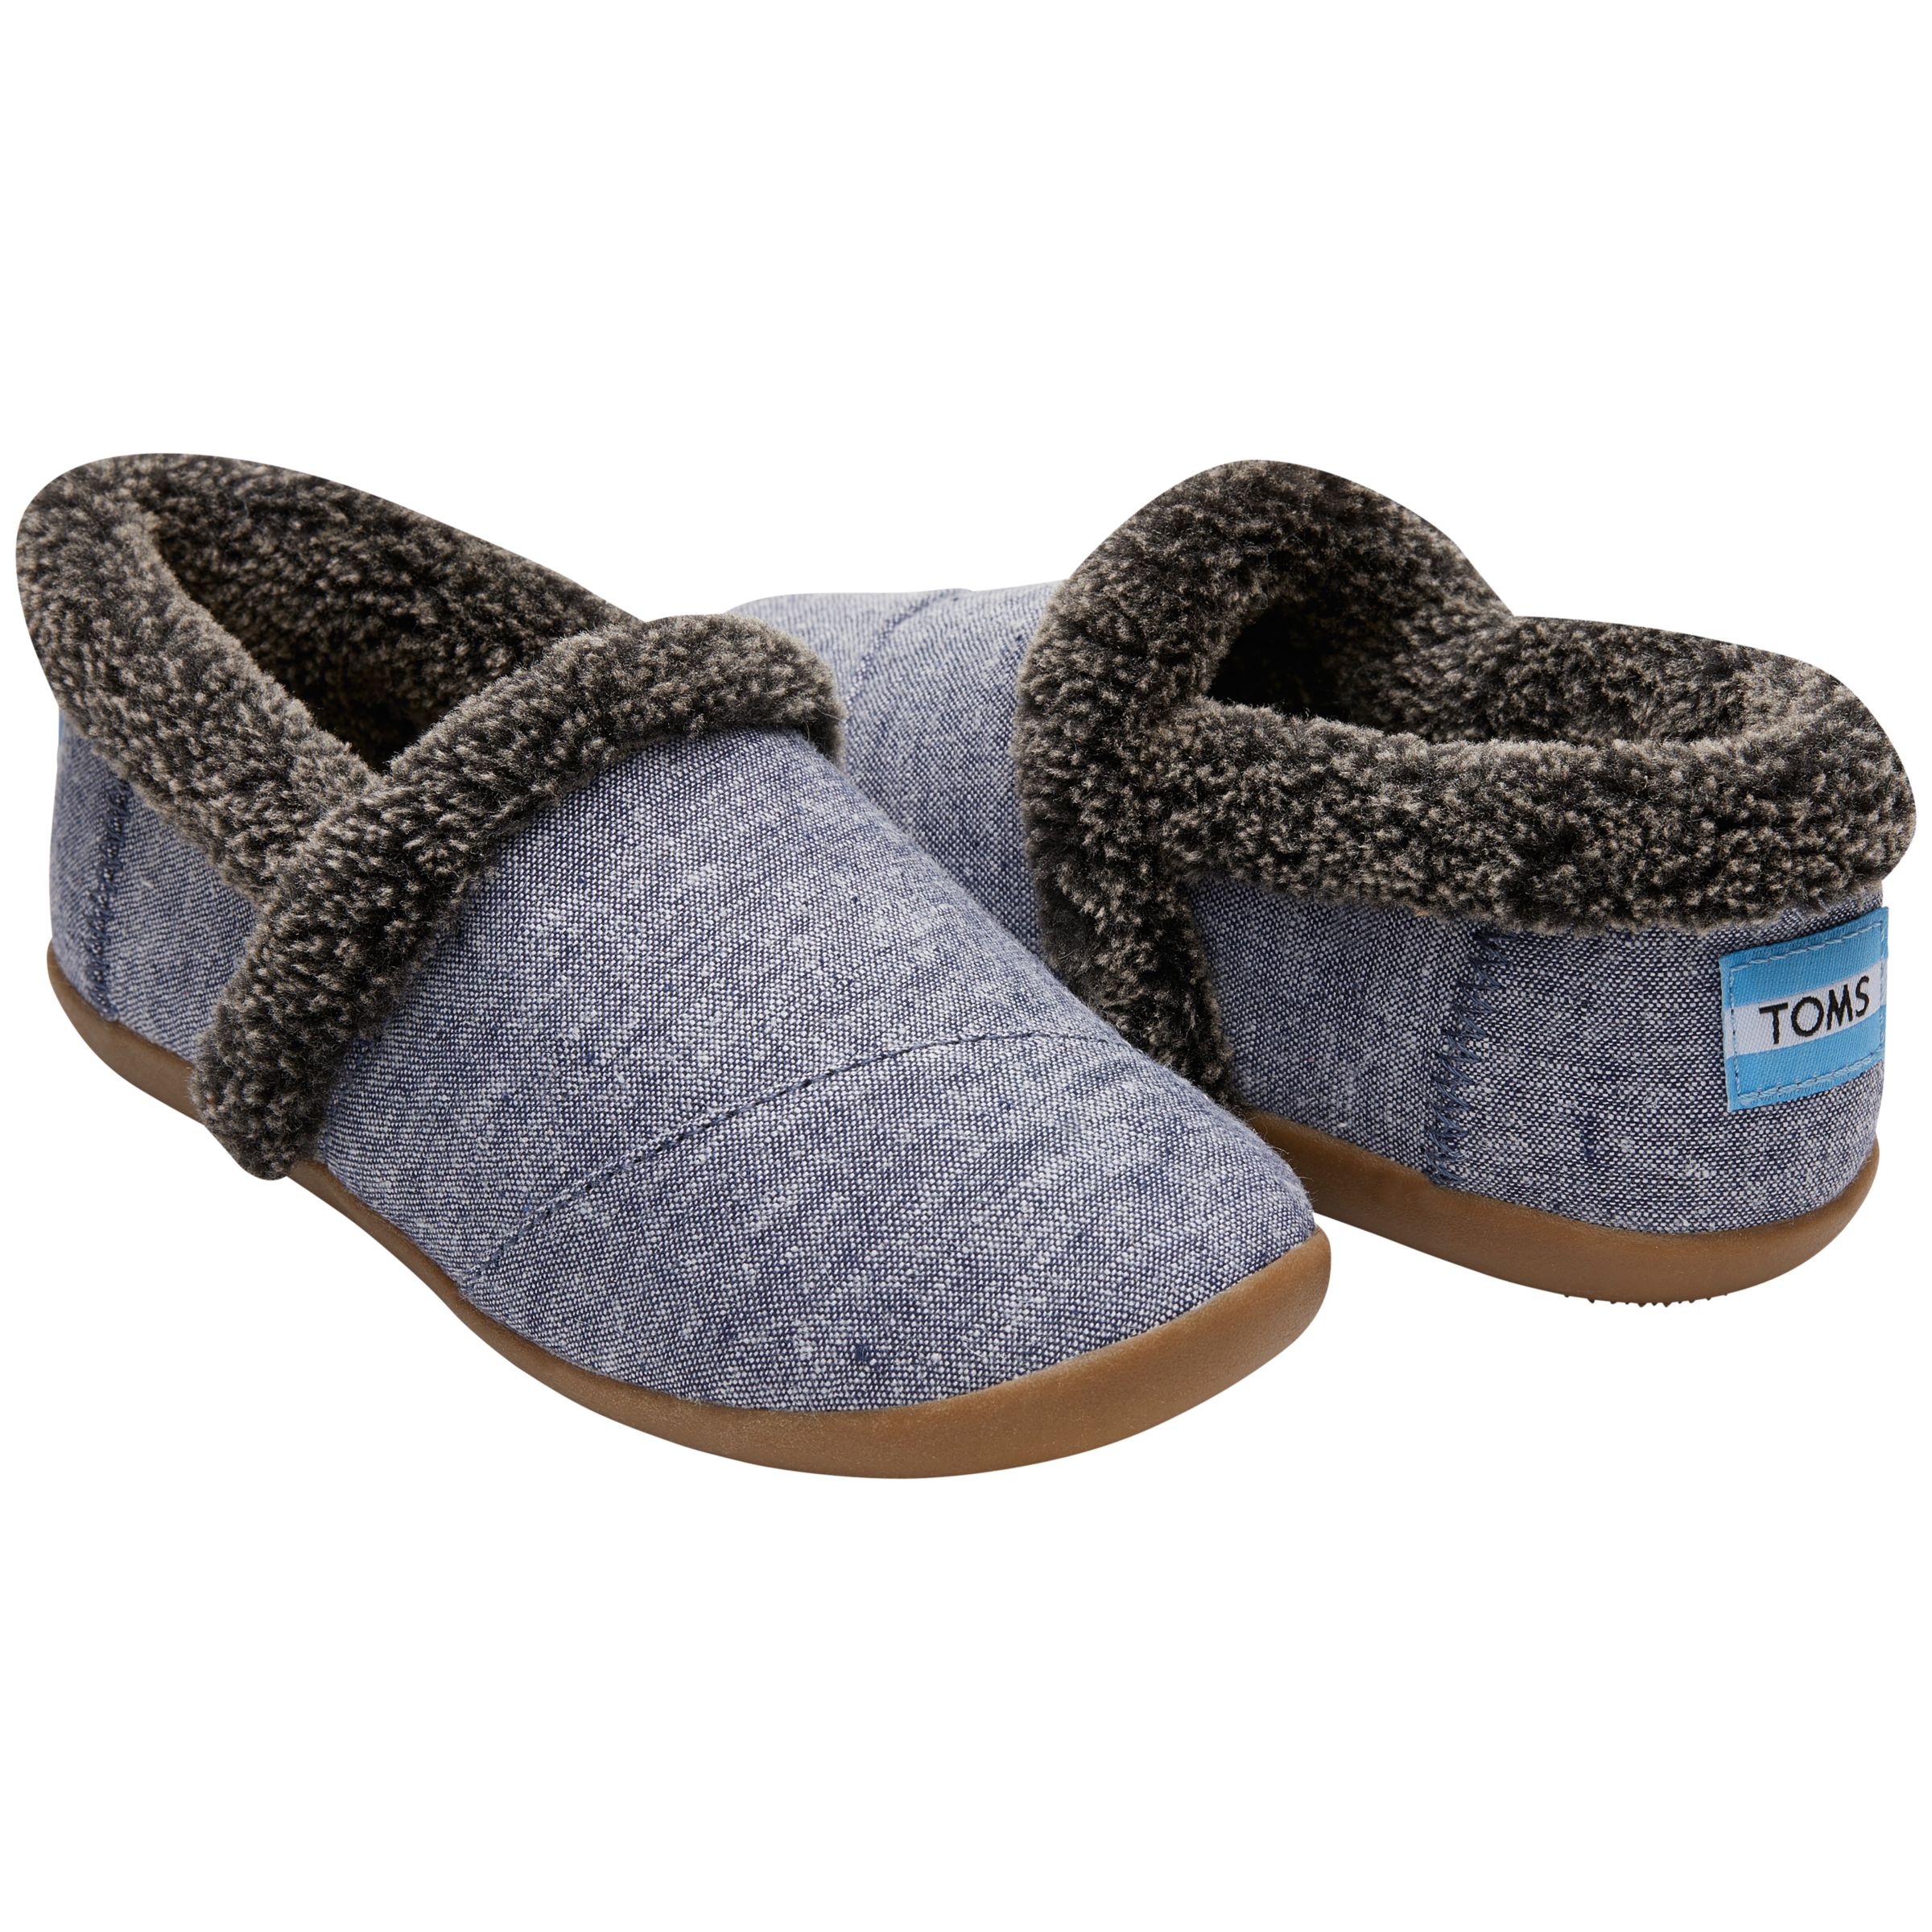 TOMS House Slippers, Chambray, 3